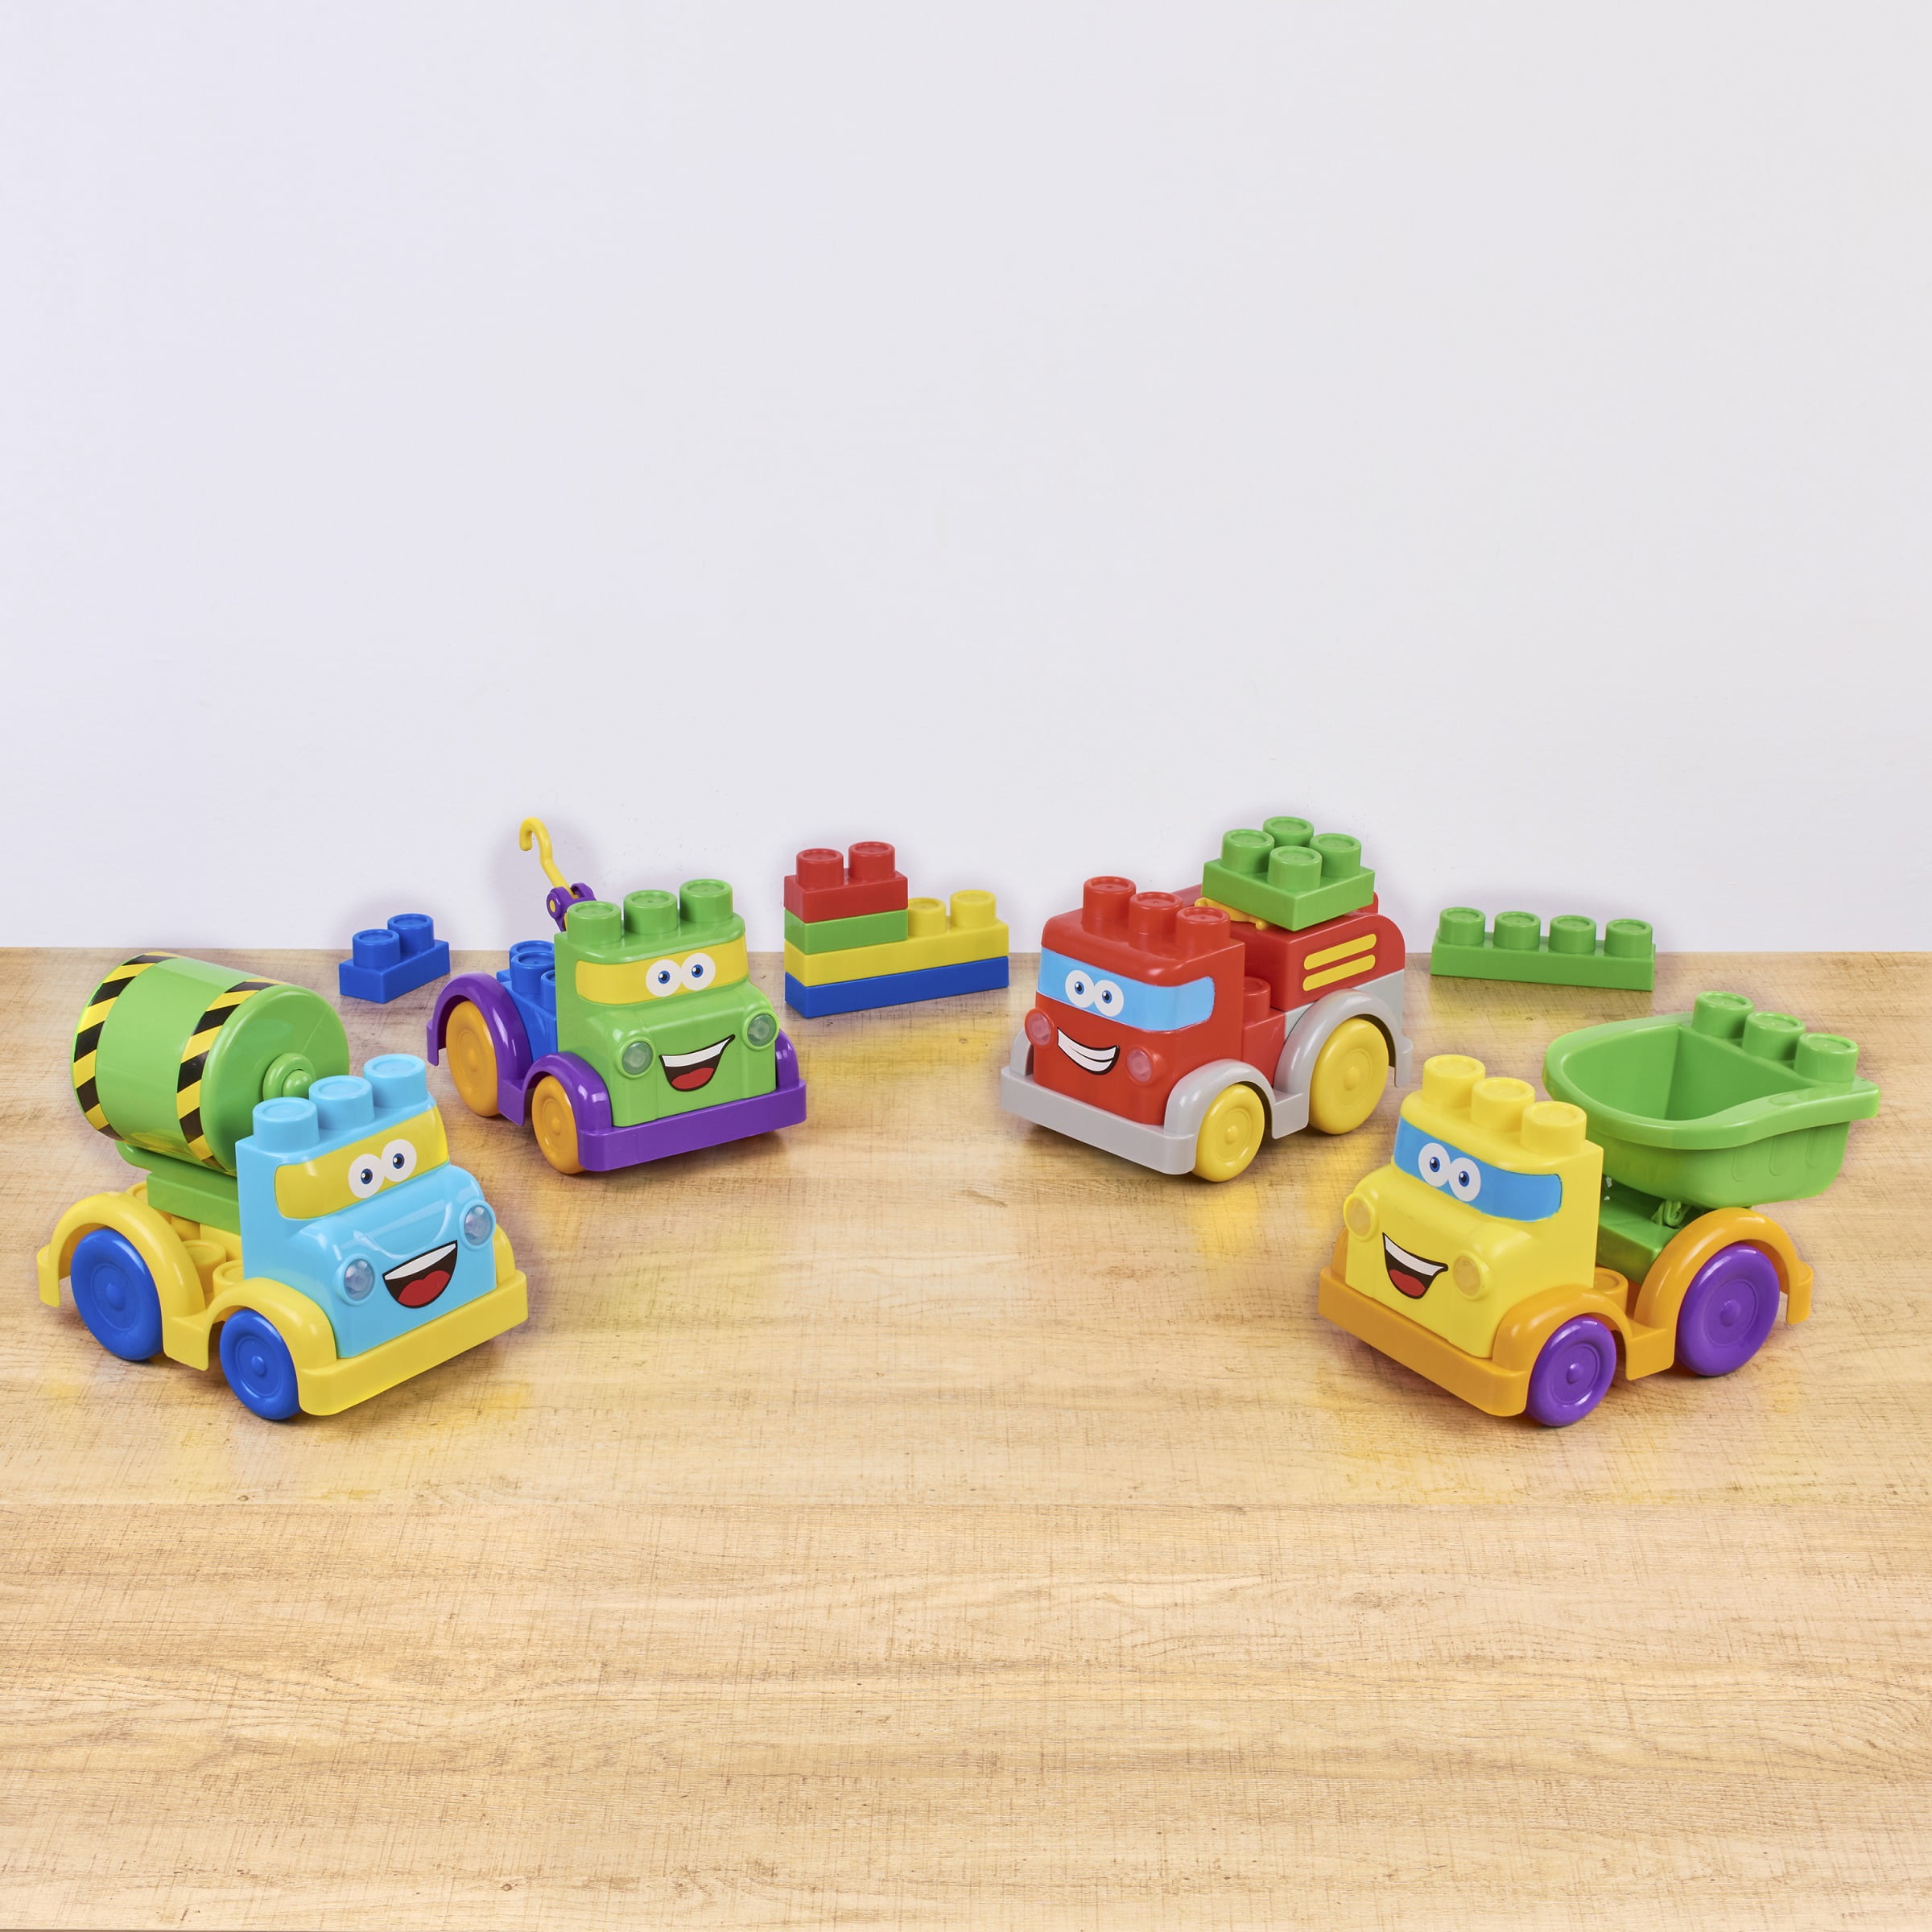 kid connection deluxe vehicles and blocks play set